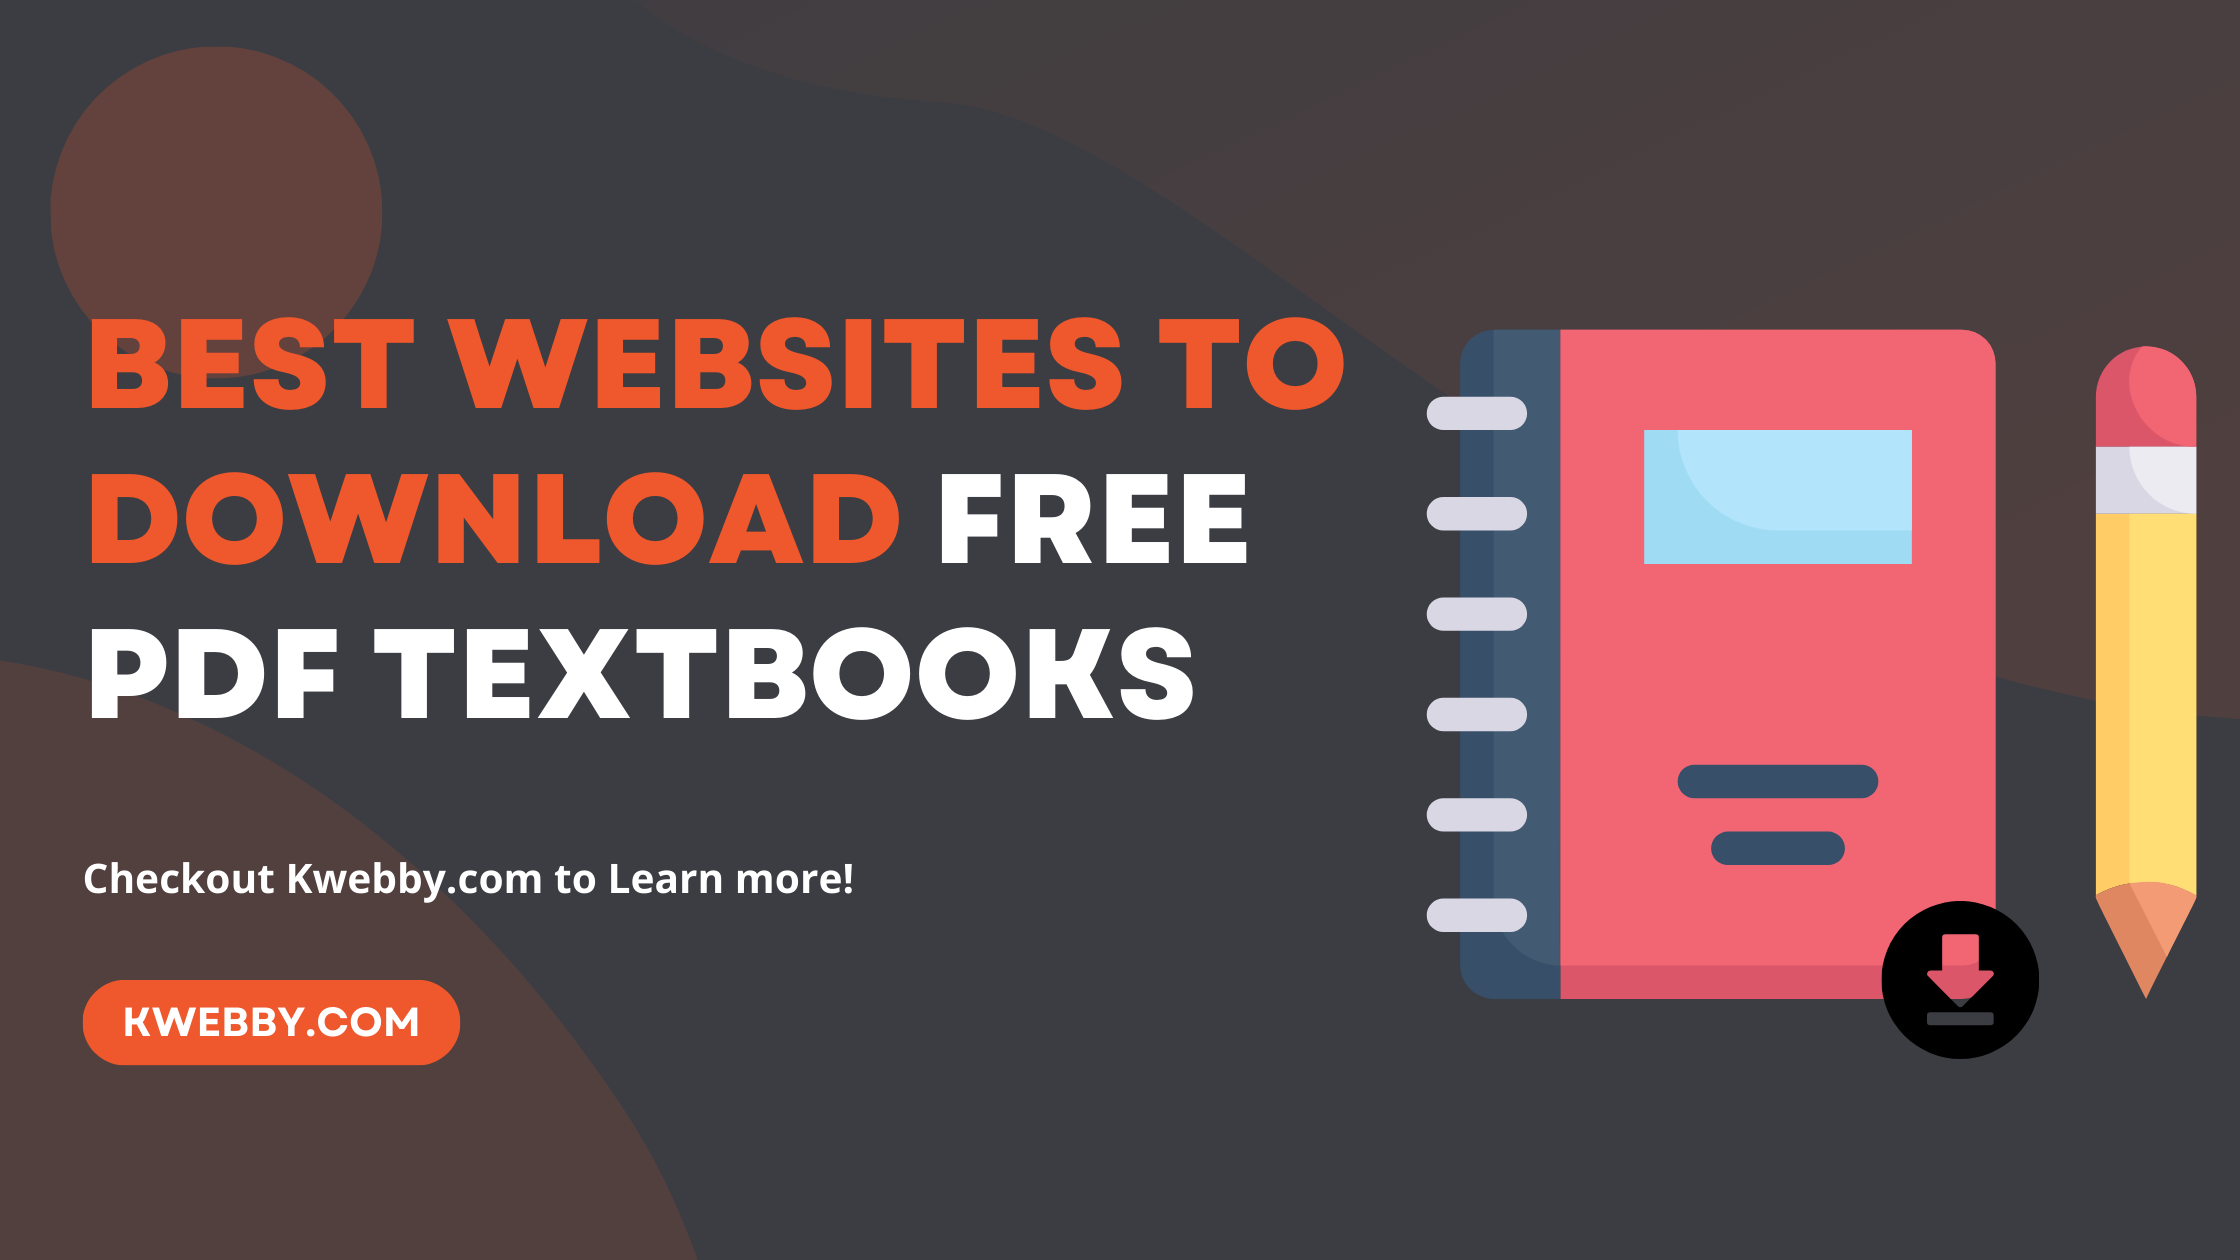 24 Best Websites To Download Free PDF Textbooks